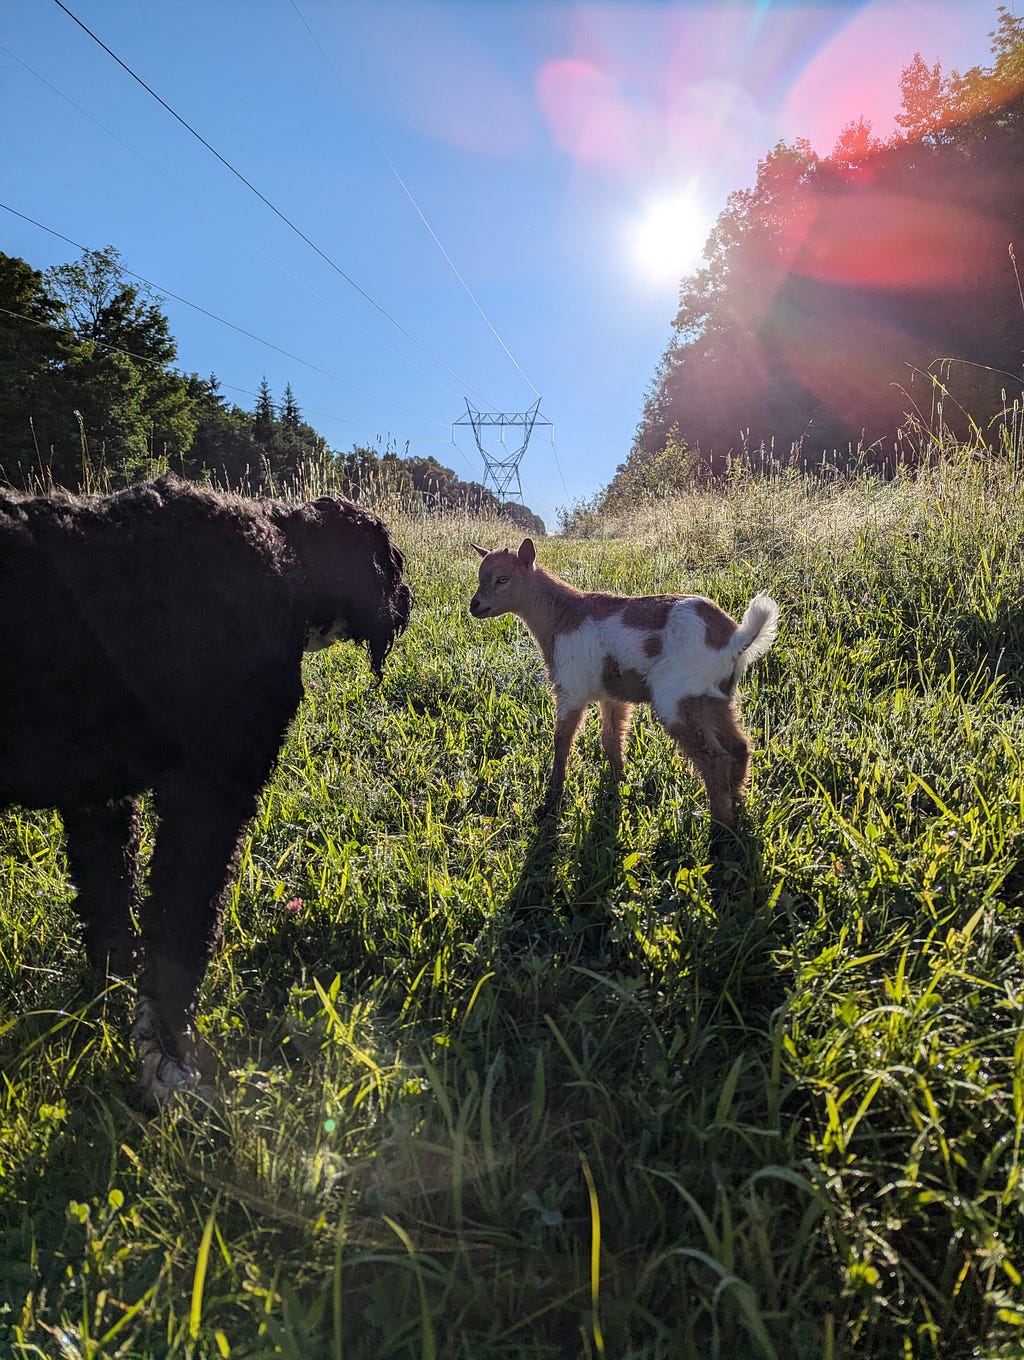 Harriet the dog checks out Thomas the goat